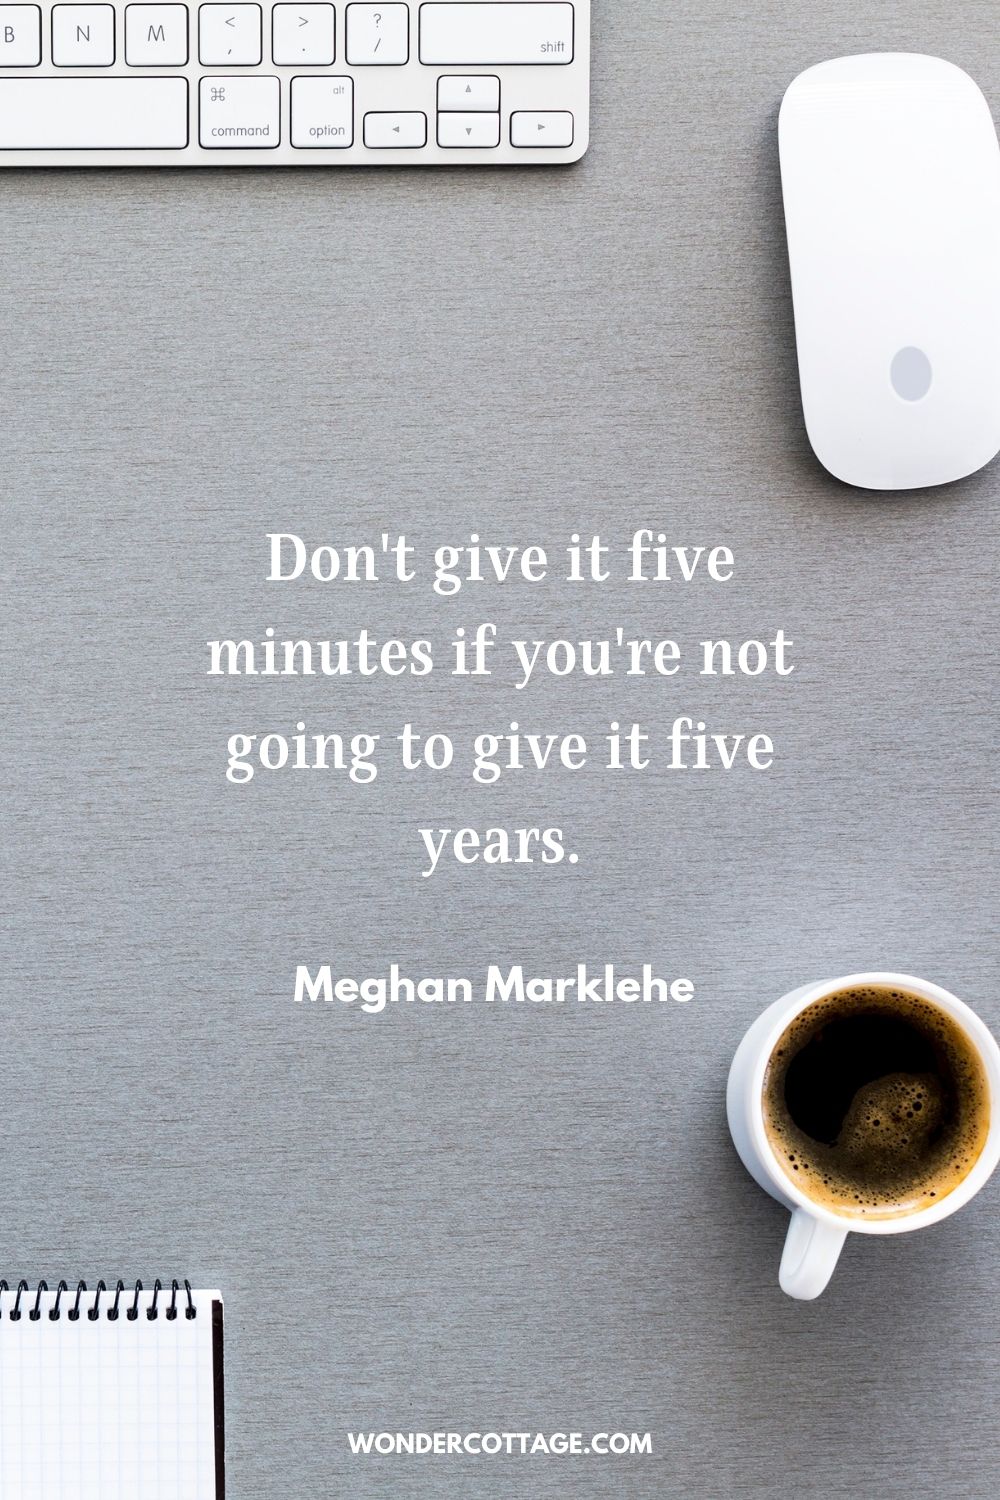 Don't give it five minutes if you're not going to give it five years. Meghan Marklehe 